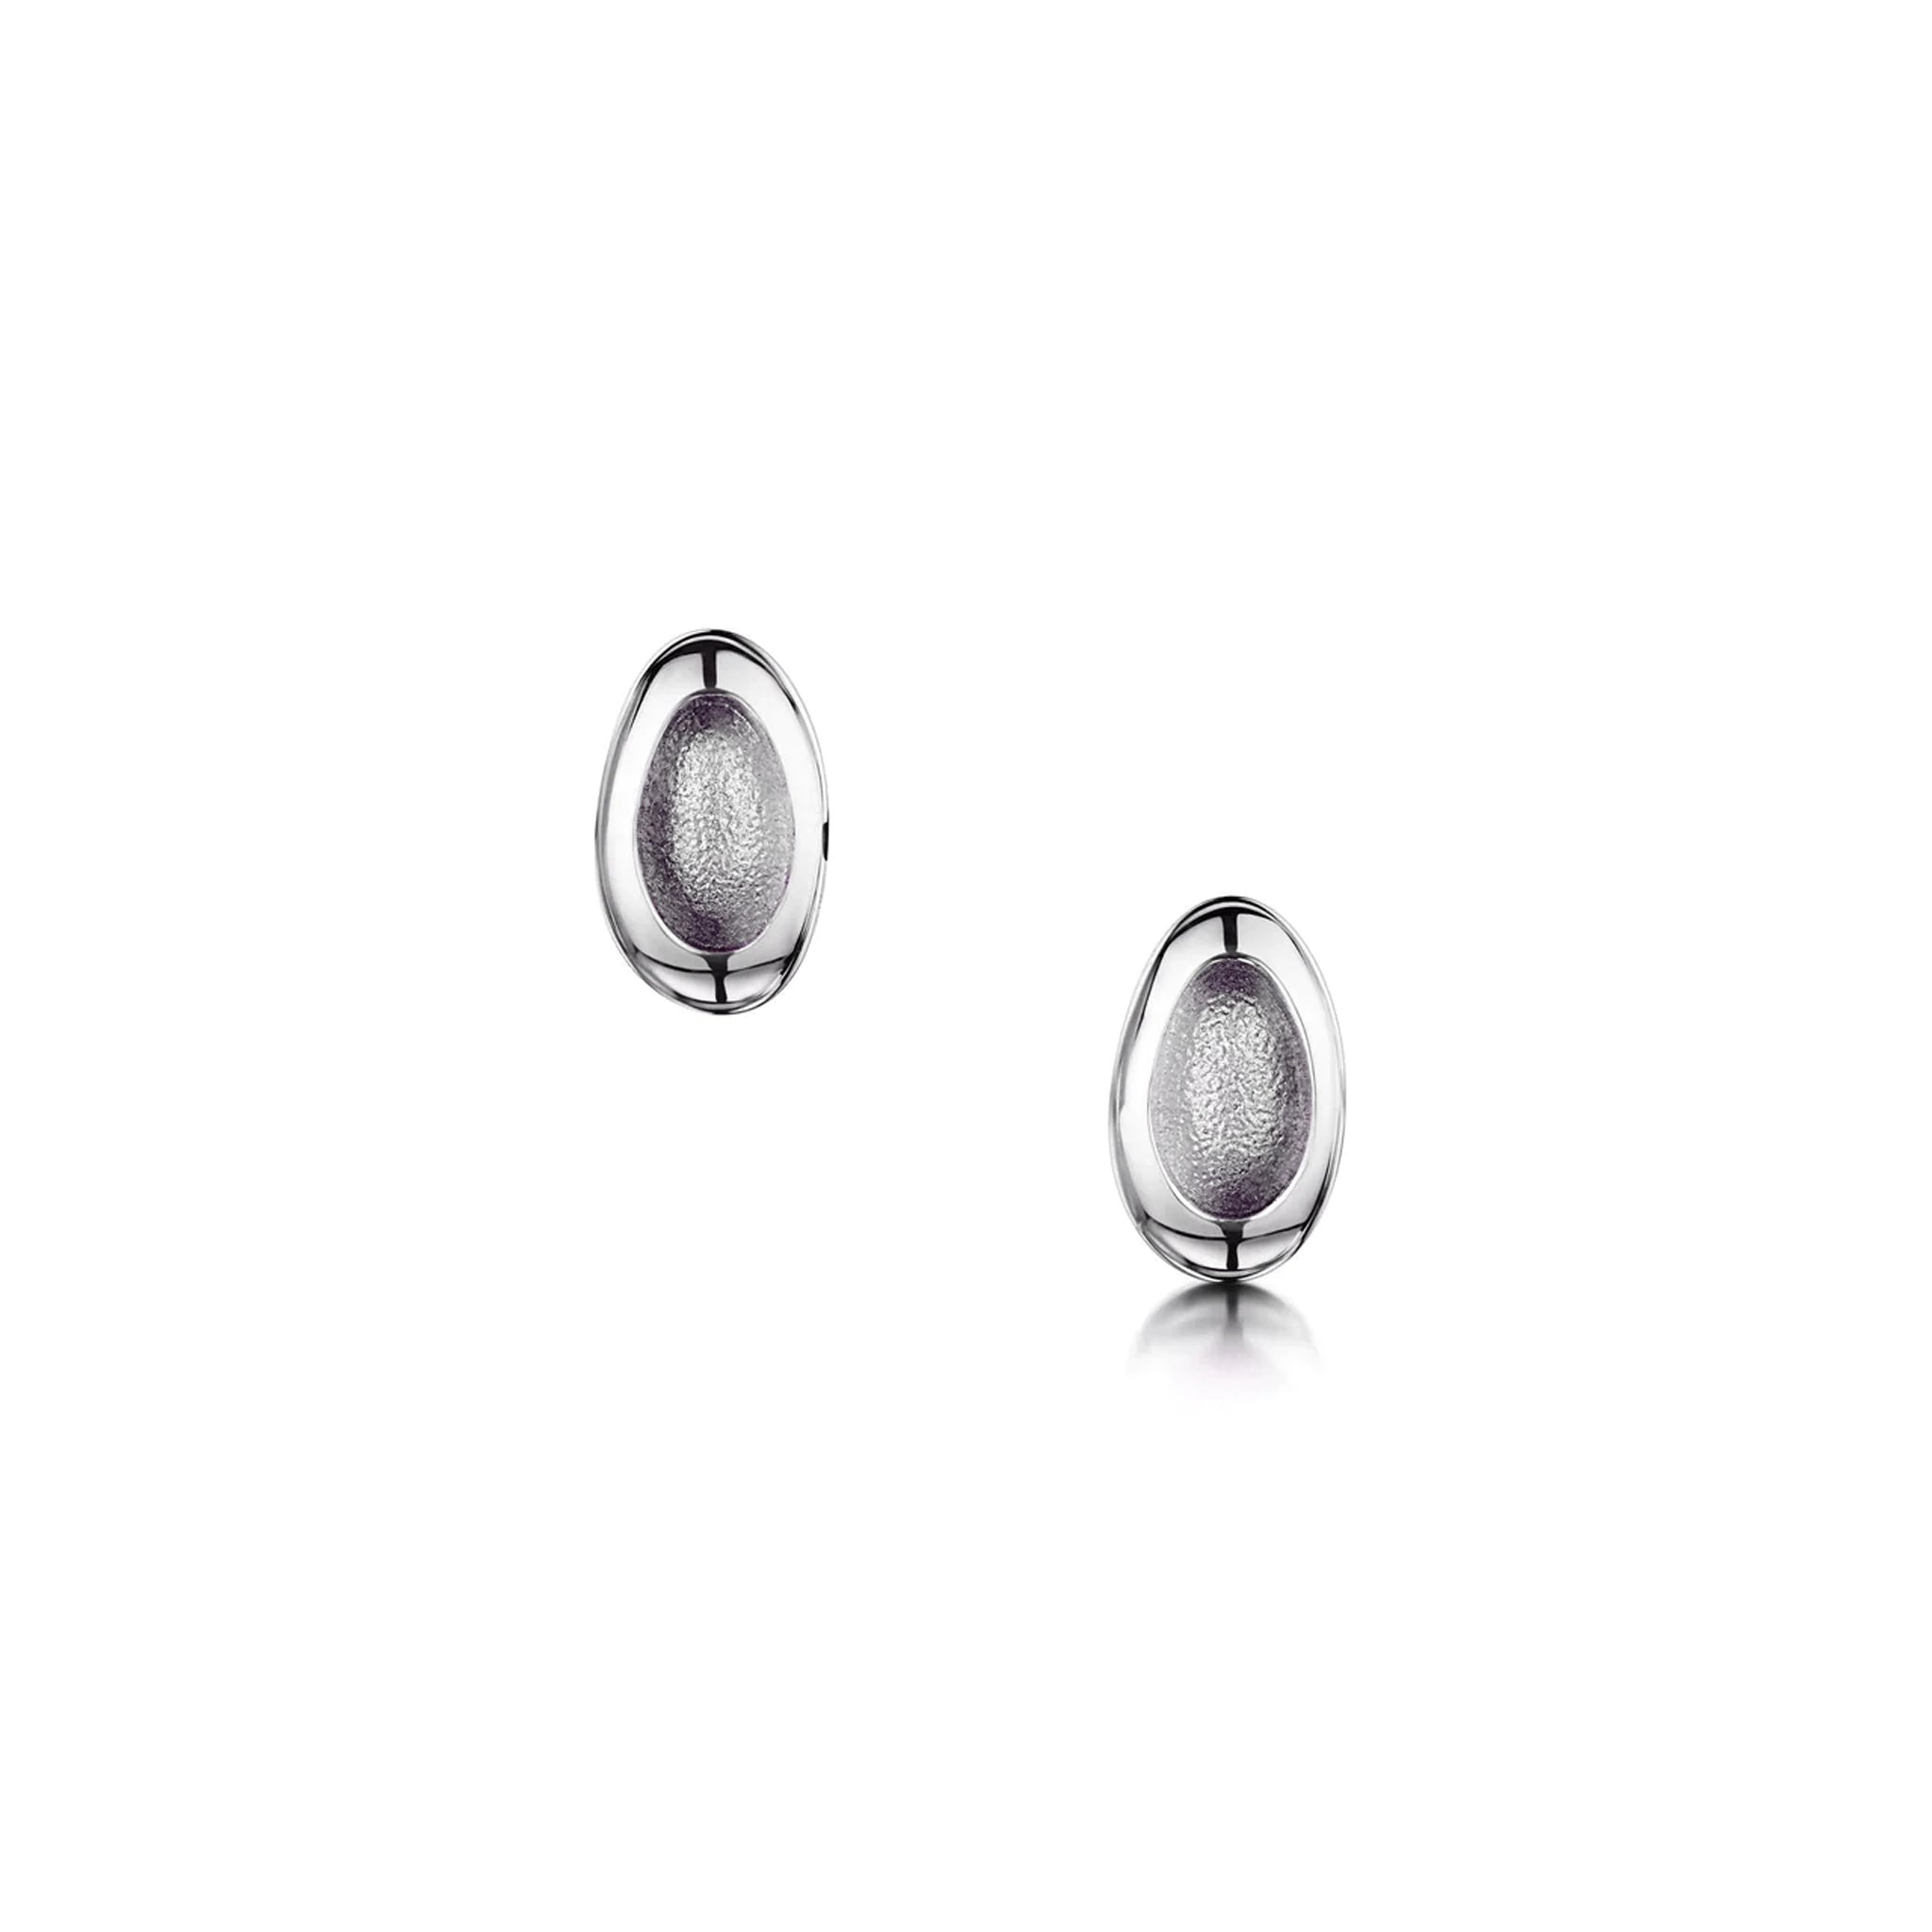 Simple silver studs in organic pebble shape with pearl grey enamel